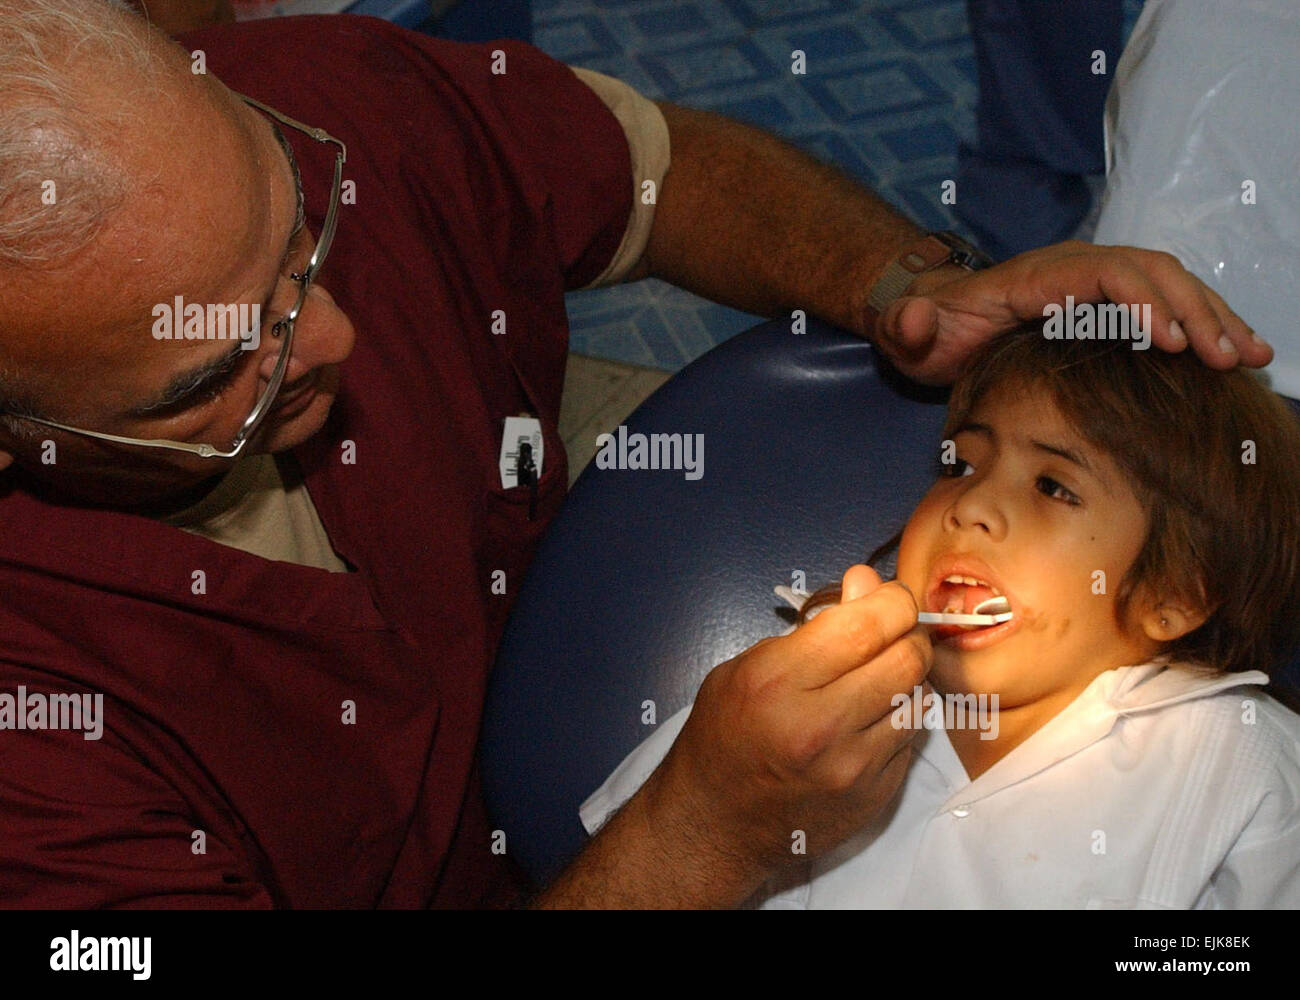 TEGUCIGALPA, Honduras -- Army Lt. Col. Dr. Manuel Marien, a pediatric dentist from Fort Hood, Texas, examines the teeth of a Honduran child during a Medical Readiness Training Exercise, or MEDRETE, Aug. 14, 2007.  Soldiers and Airmen are helping hundreds of Honduran children and providing much needed dental care at the Catholic University Dental School here. US Air Force photo/1st Lt. Erika Yepsen Stock Photo